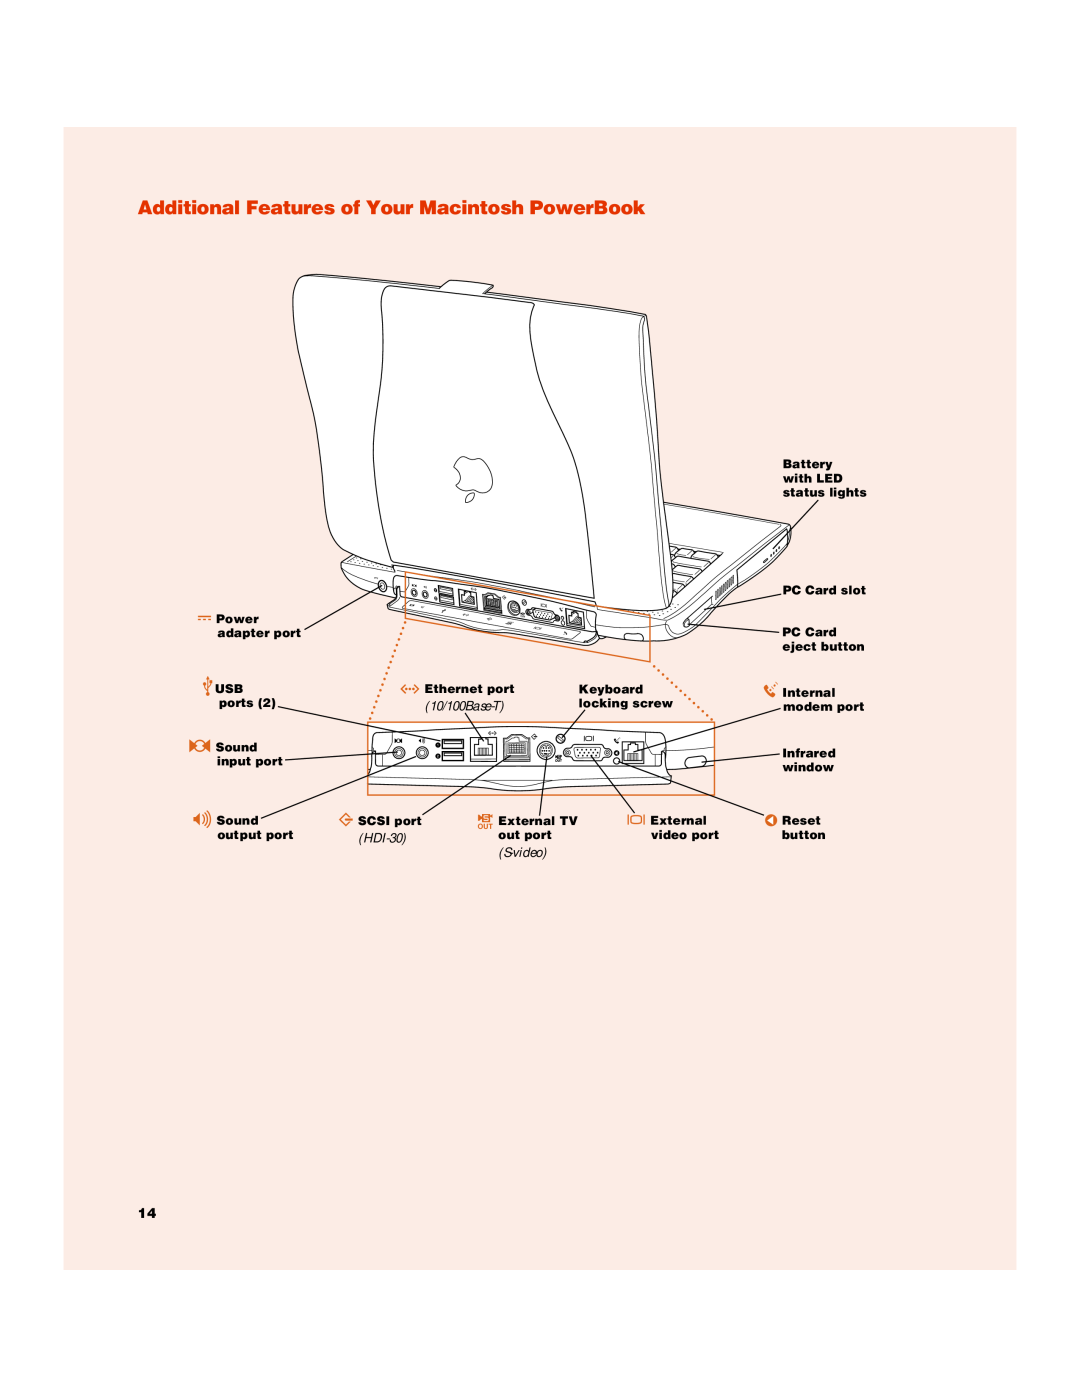 Apple G3 manual Additional Features of Your Macintosh PowerBook, HDI-30, S-video 